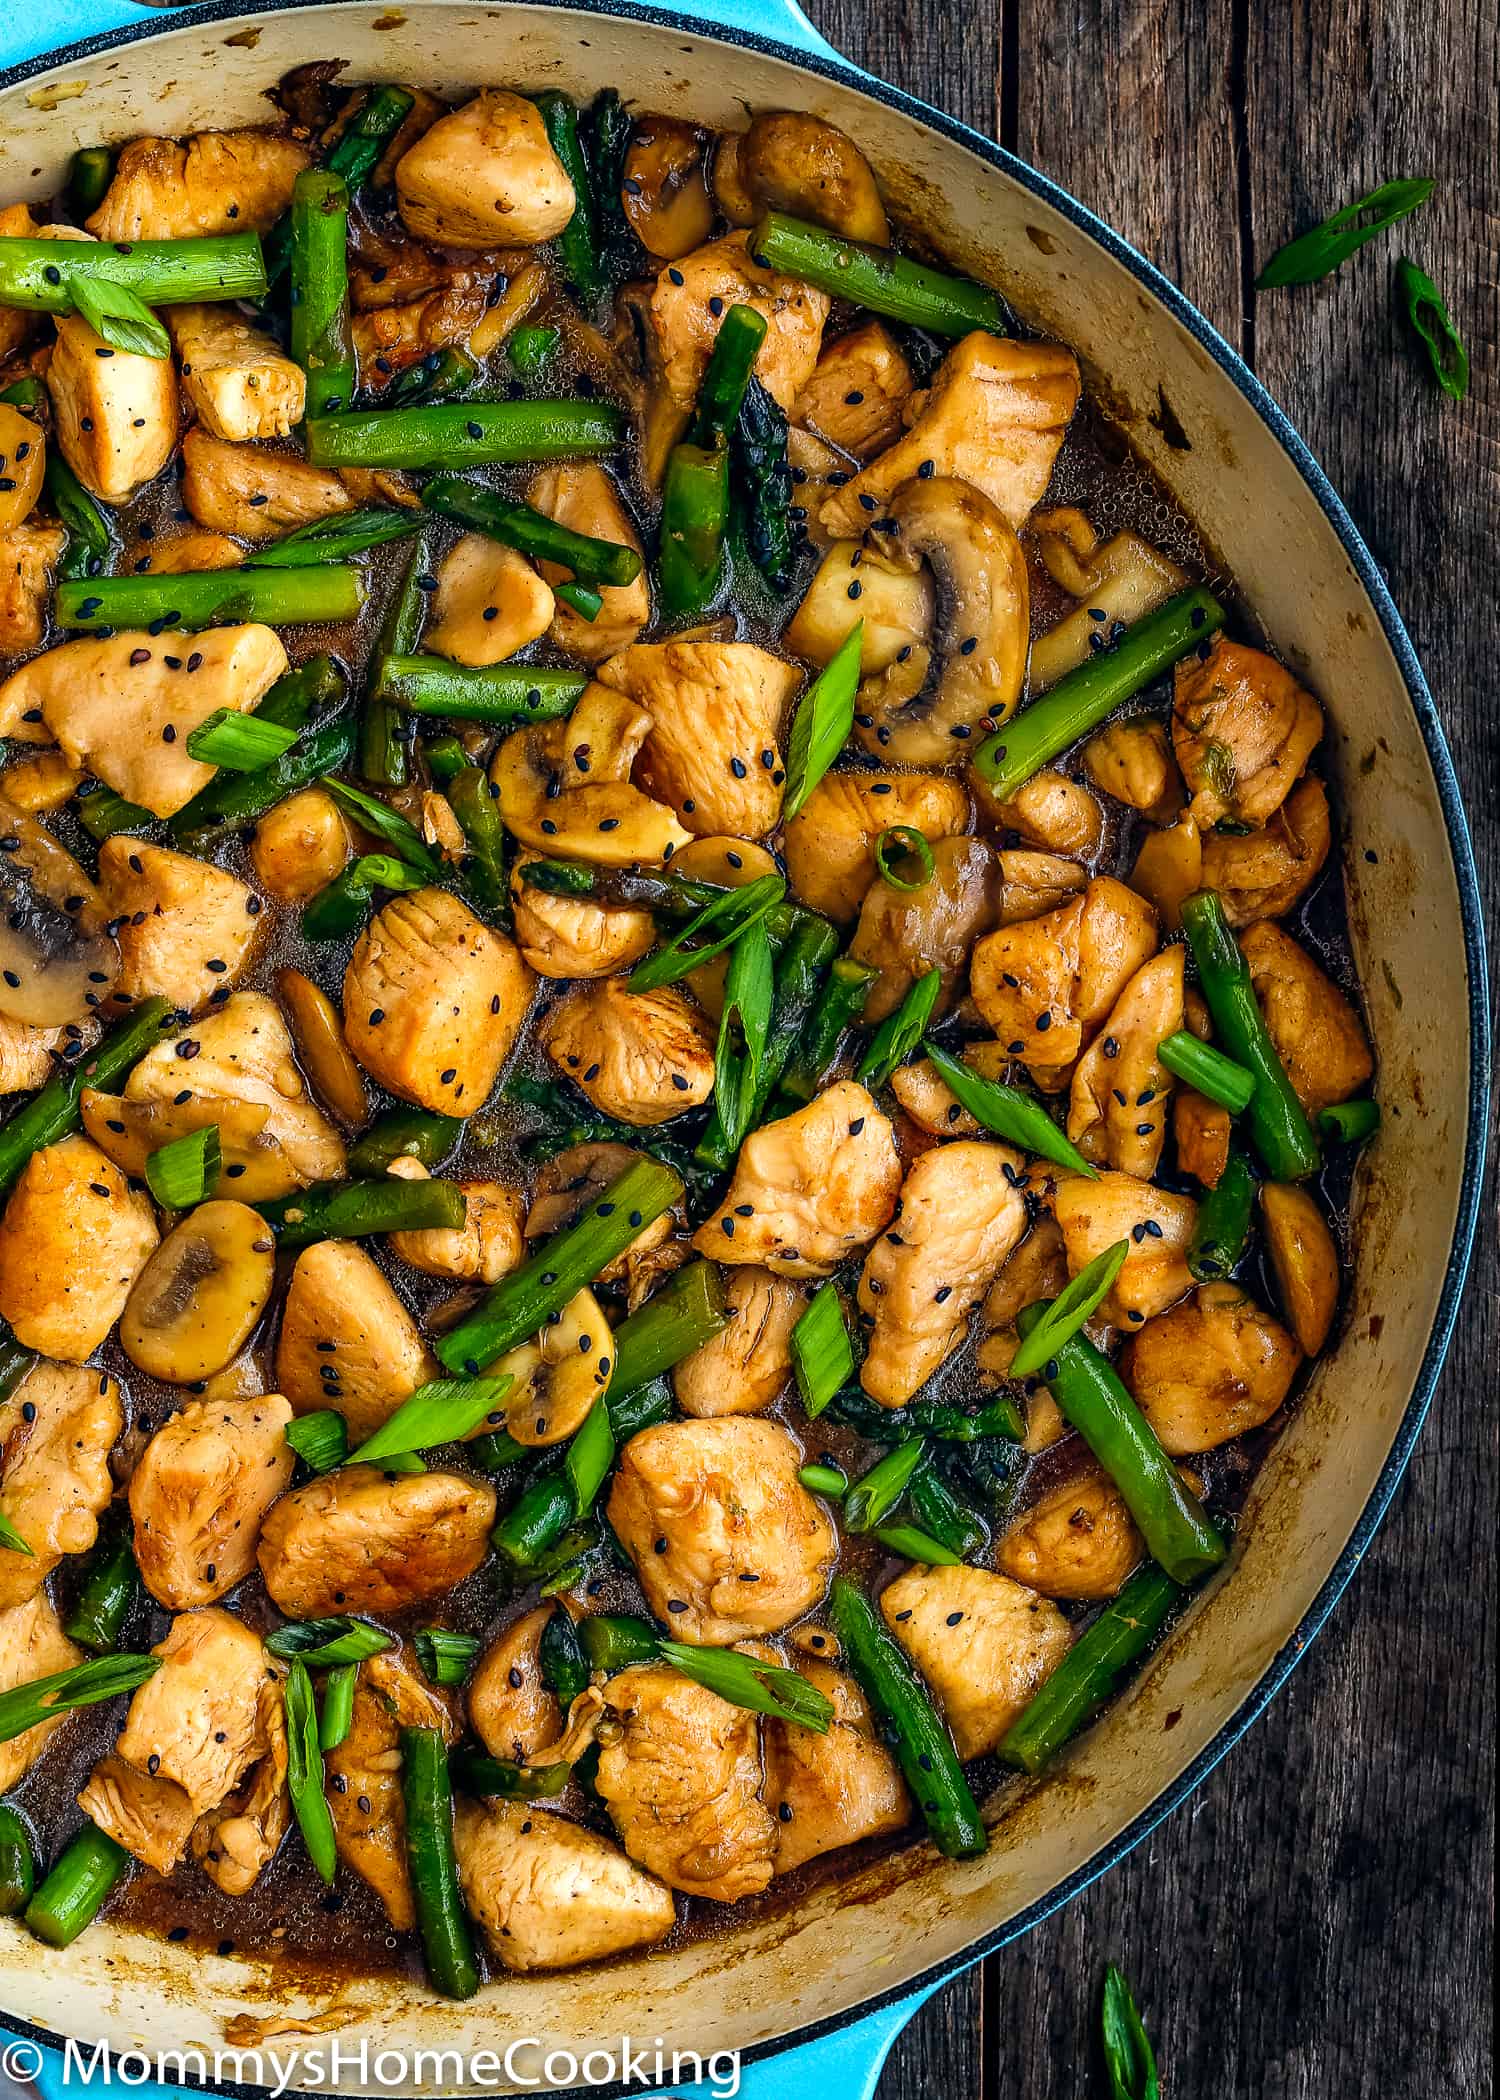 Easy Healthy Chicken and Asparagus Skillet - Mommy's Home Cooking